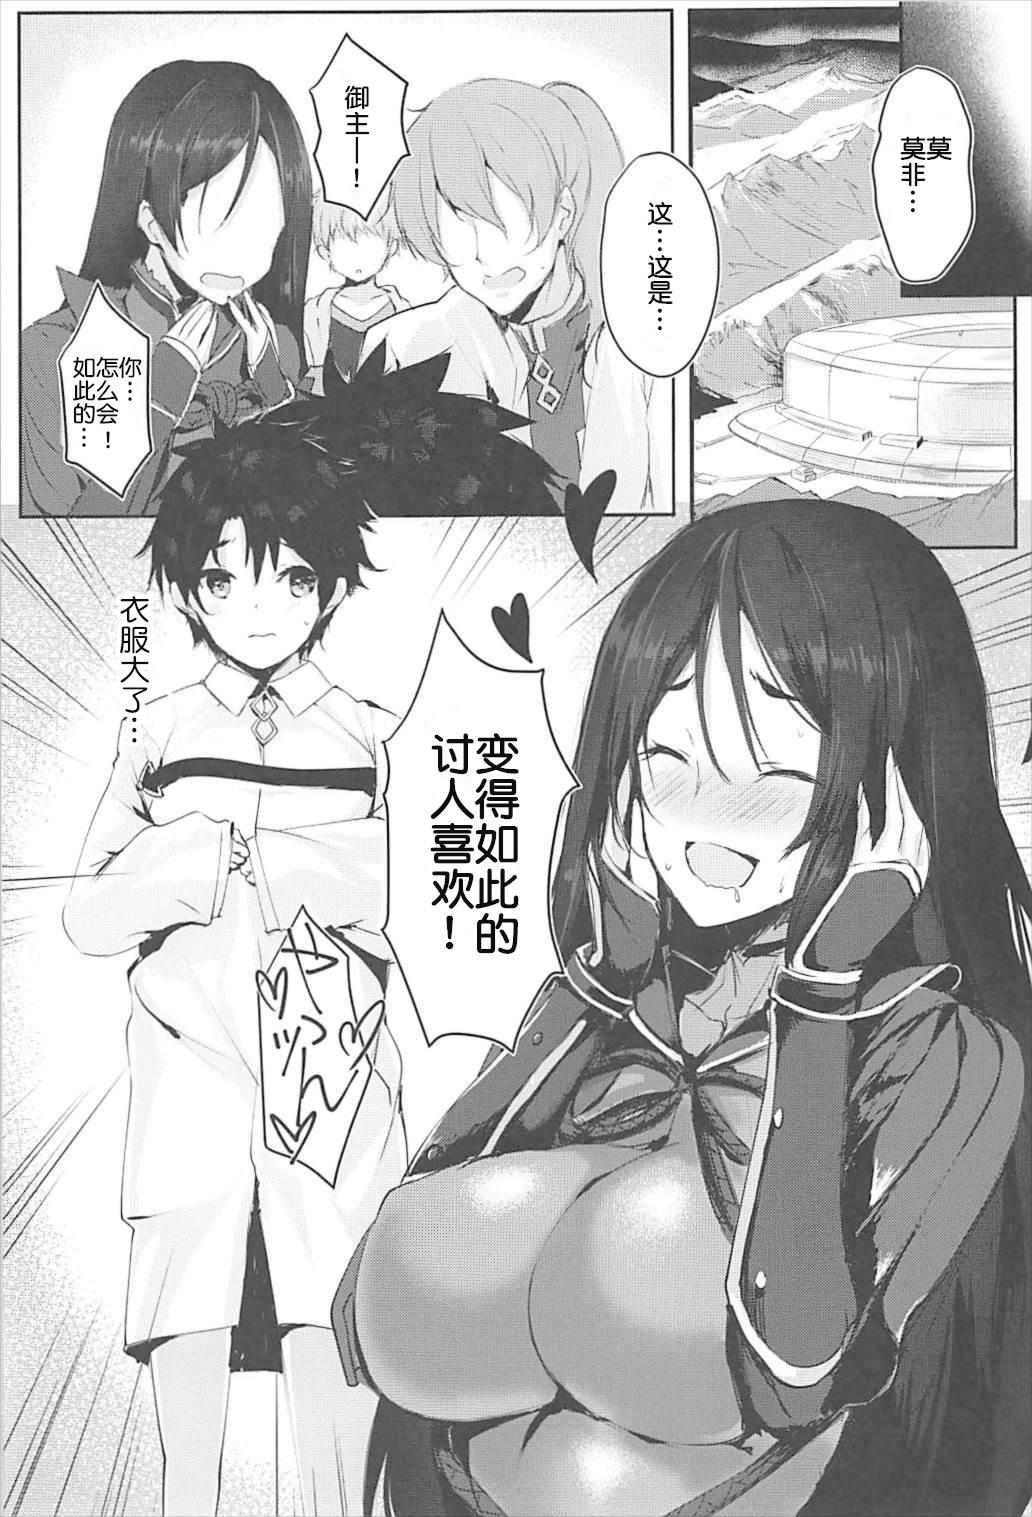 Fucking CHALDEA NIGHT - Fate grand order Clothed Sex - Page 2